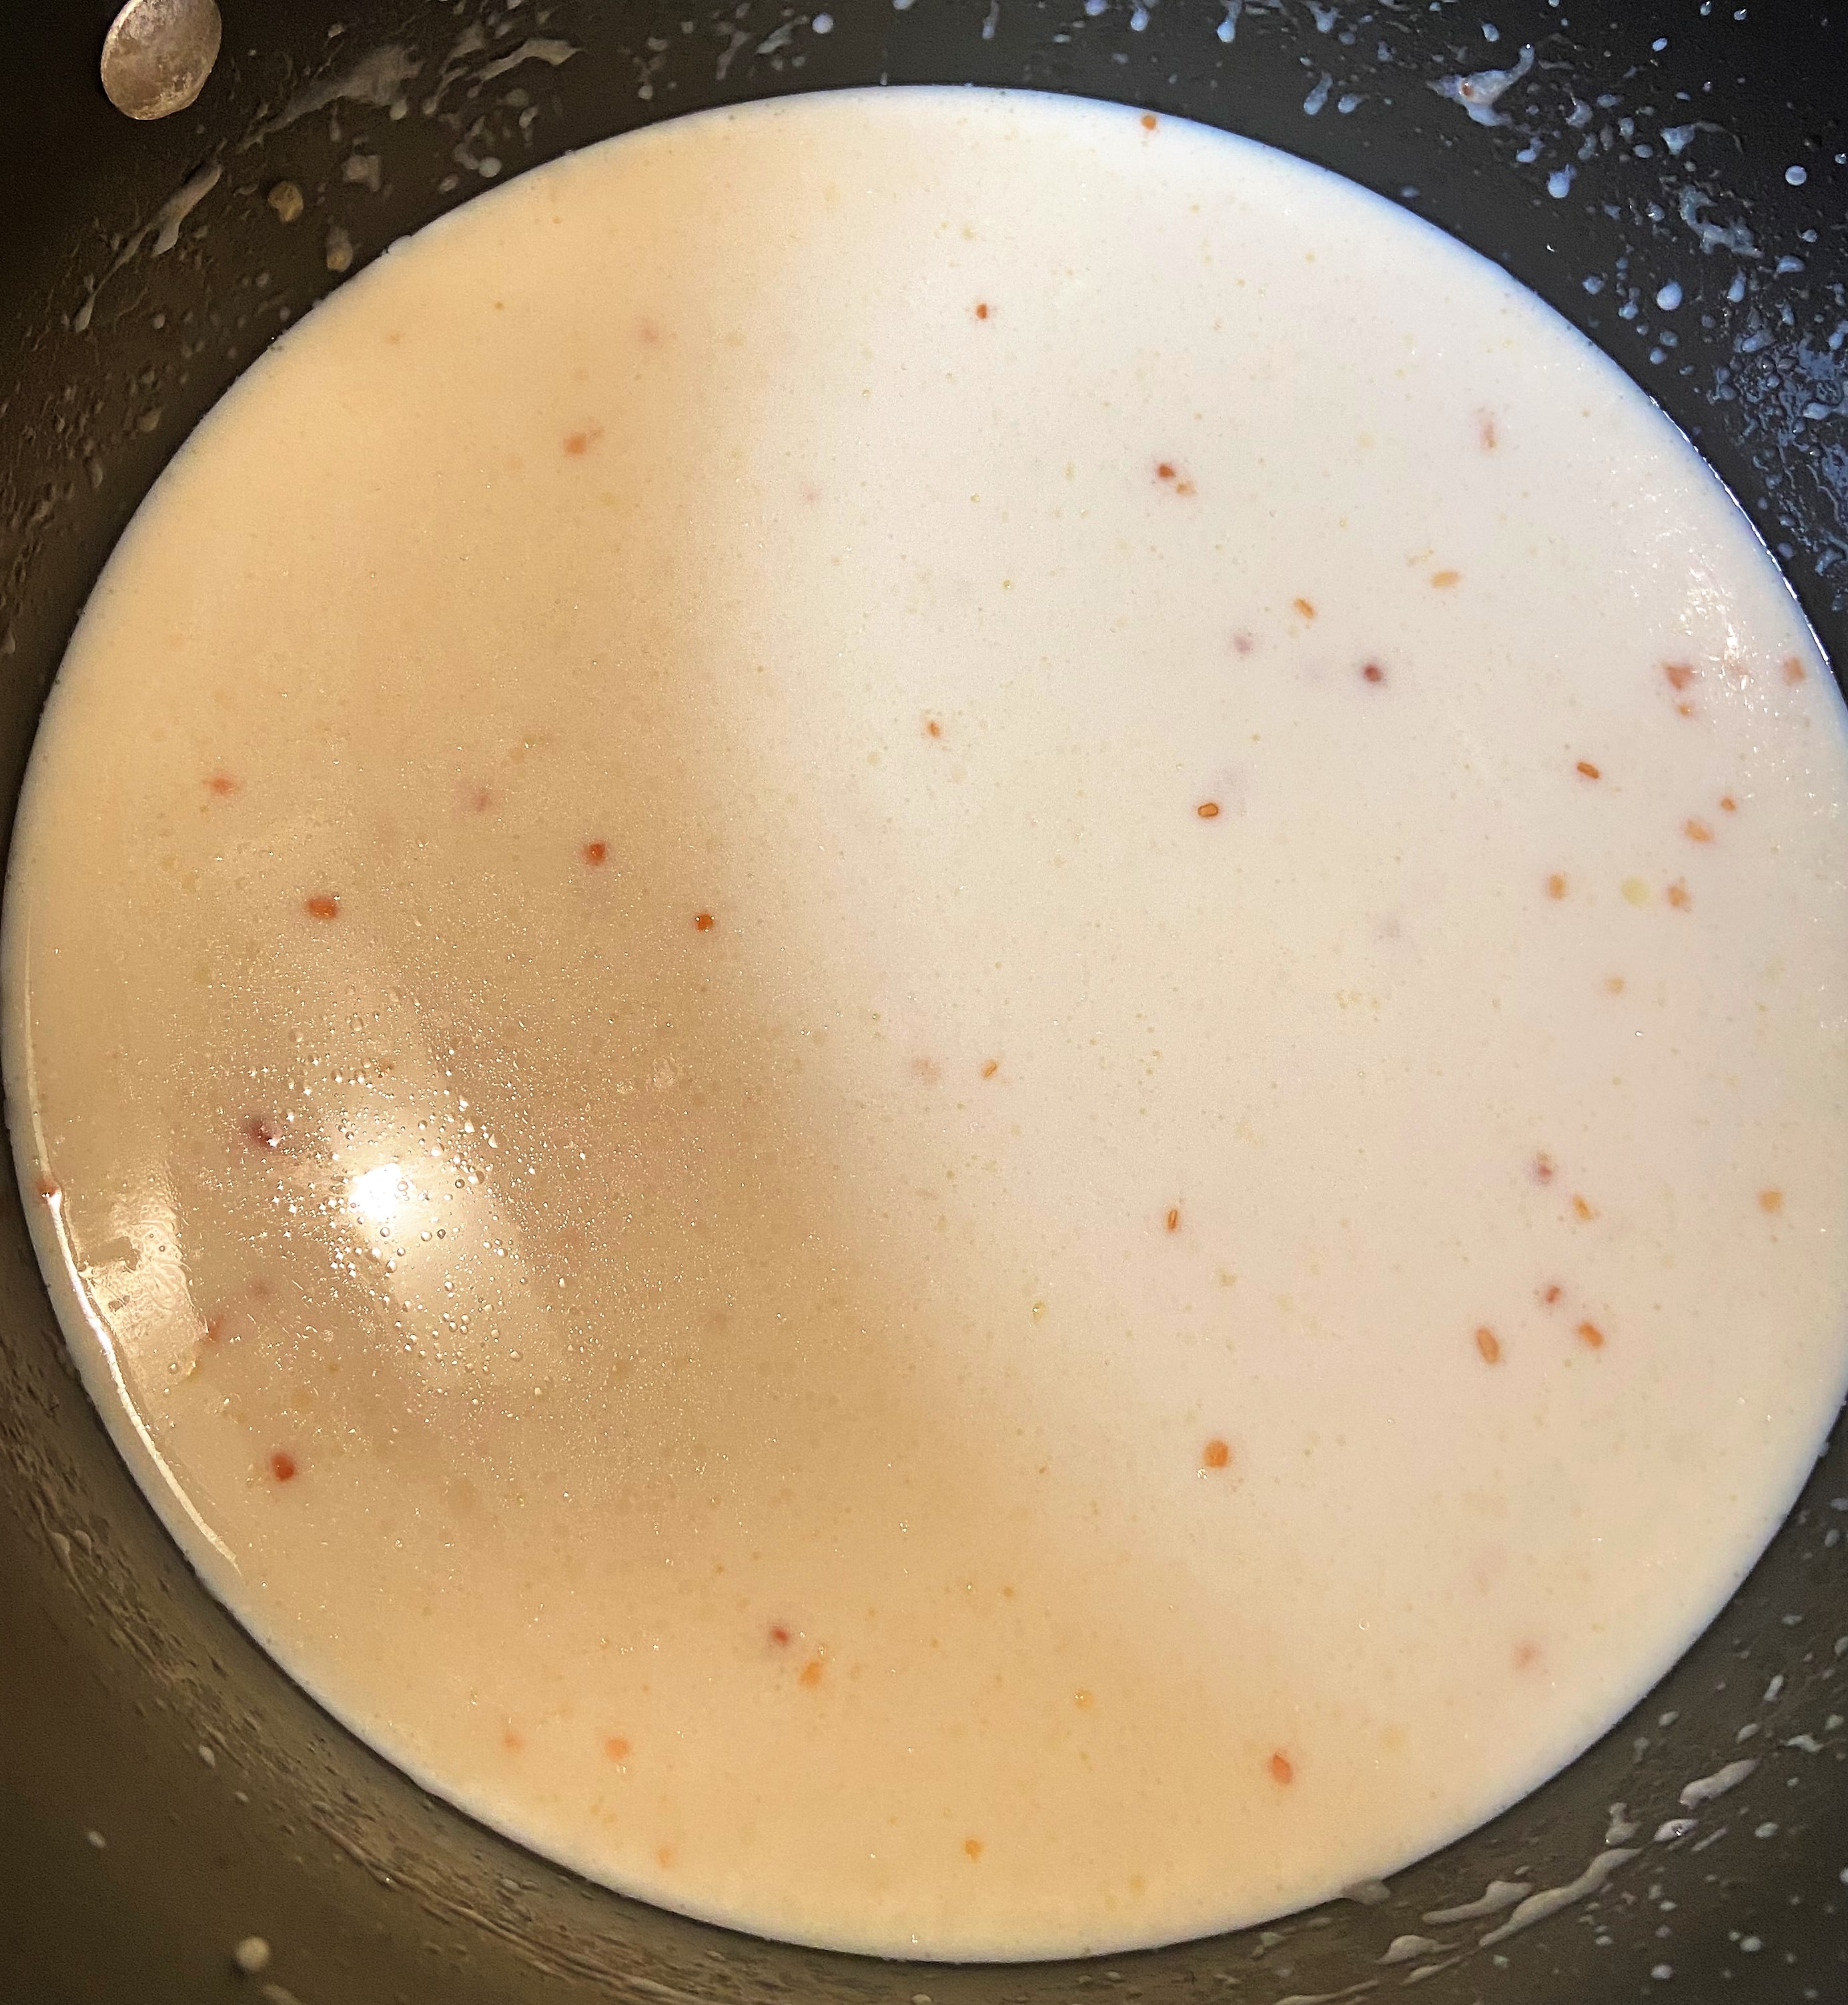 mix in milk and stir until well combined